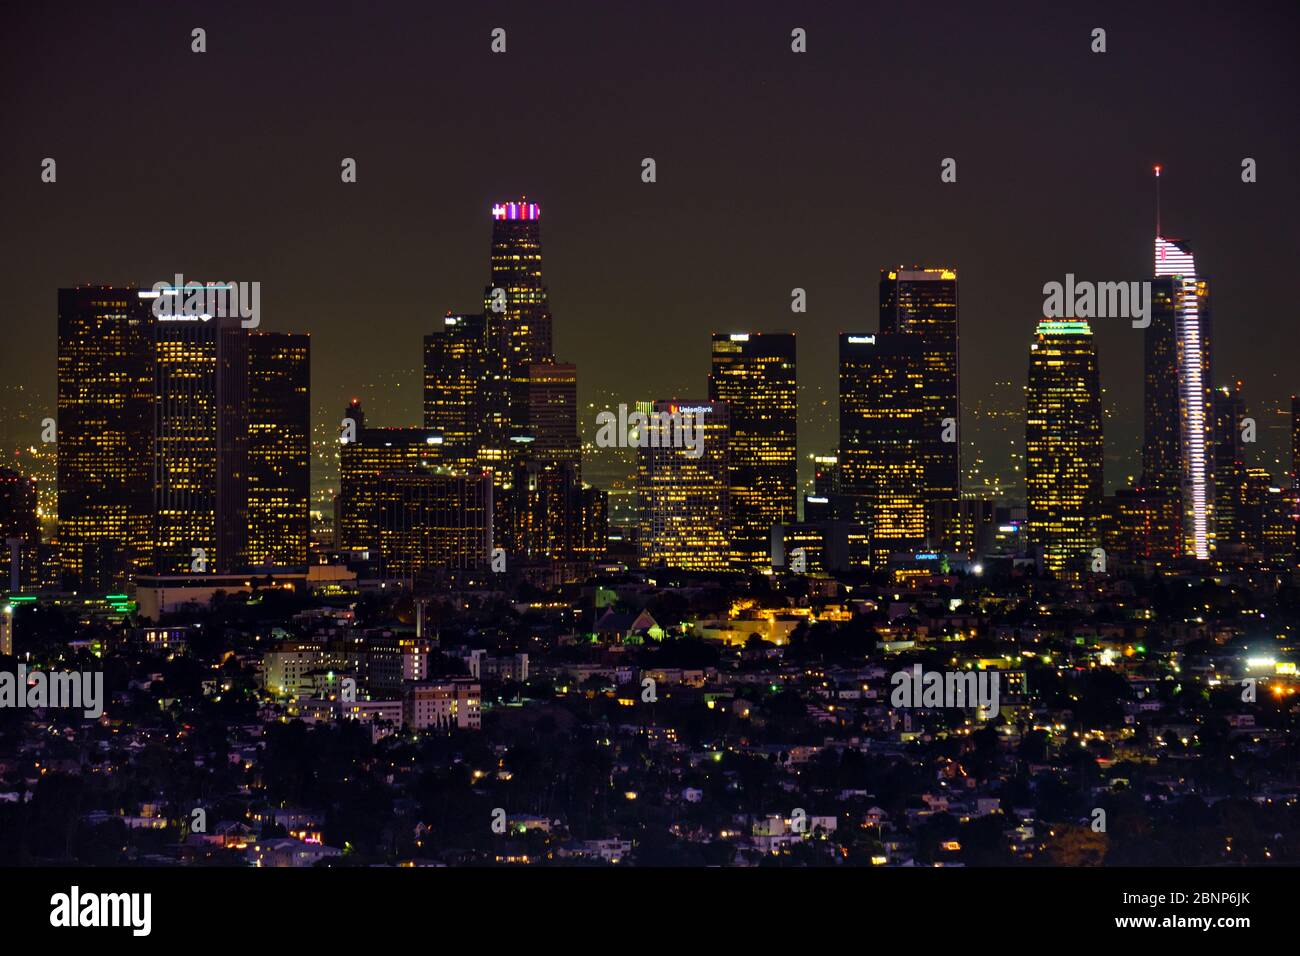 USA, United States of America, California, Los Angeles, Downtown, Hollywood, Beverly Hills, view from Griffith Observatory by night Stock Photo